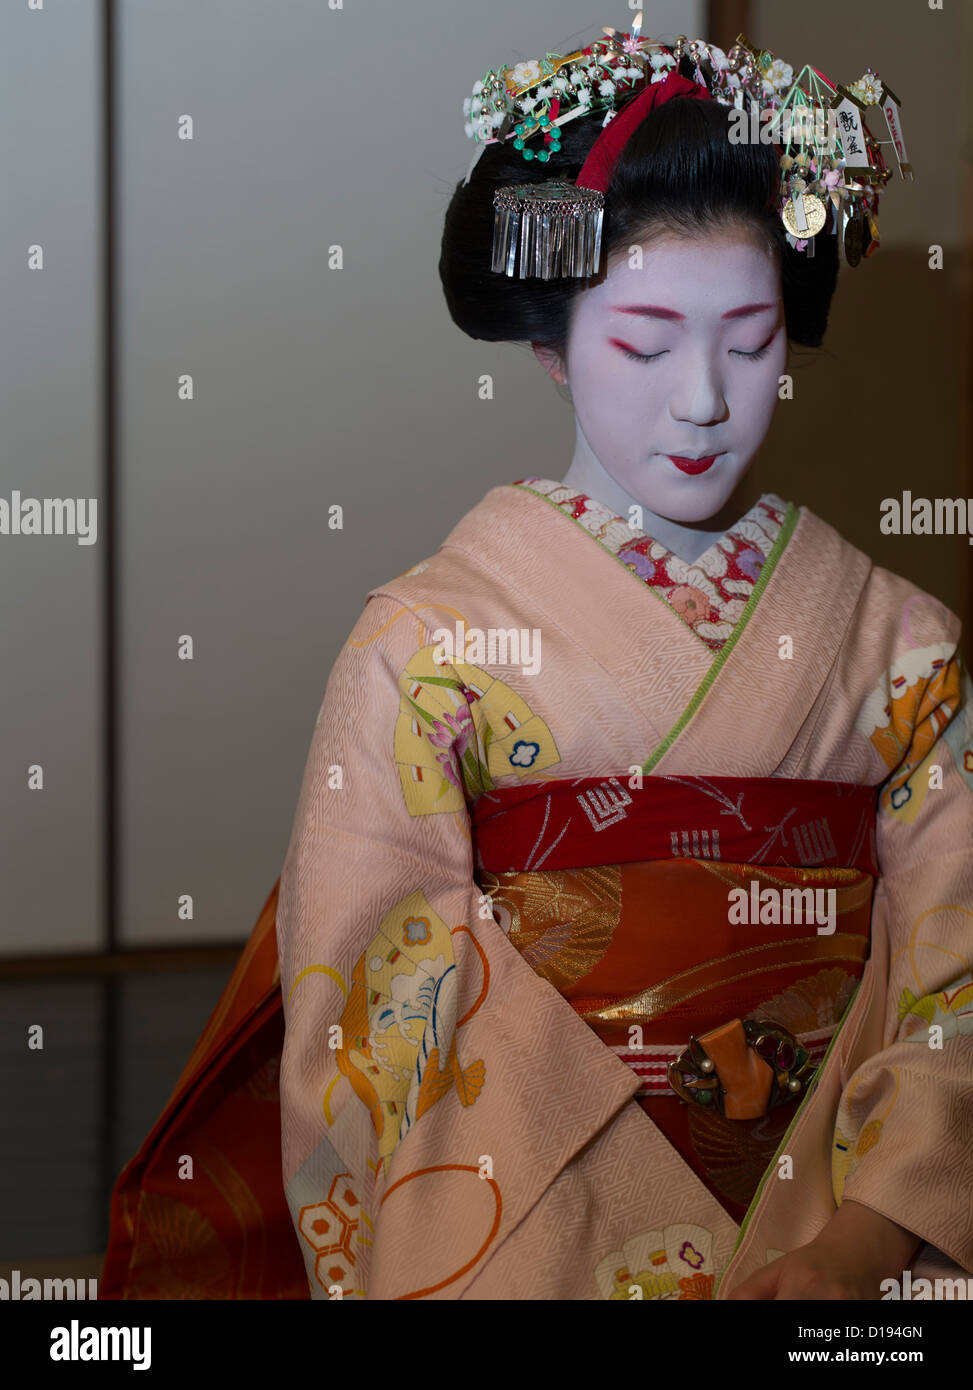 Eriha at 17 year old maiko ( trainee geisha ) entertaining guests in a Gion teahouse in Kyoto, Japan Stock Photo